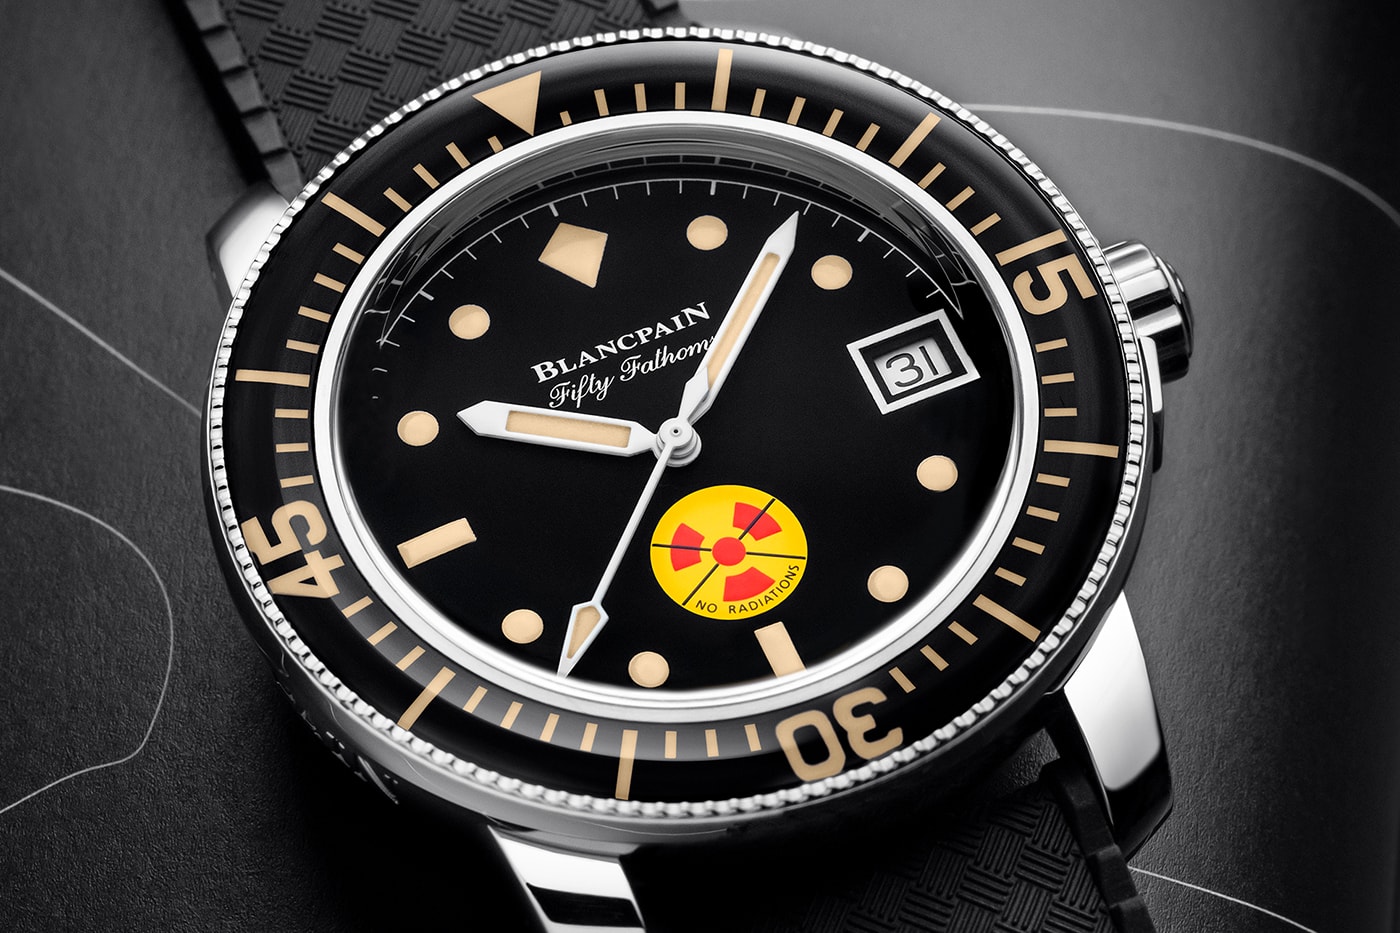 Blancpain Pays Tribute to the Fifty Fathoms No Rad With 500-Piece Limited Edition